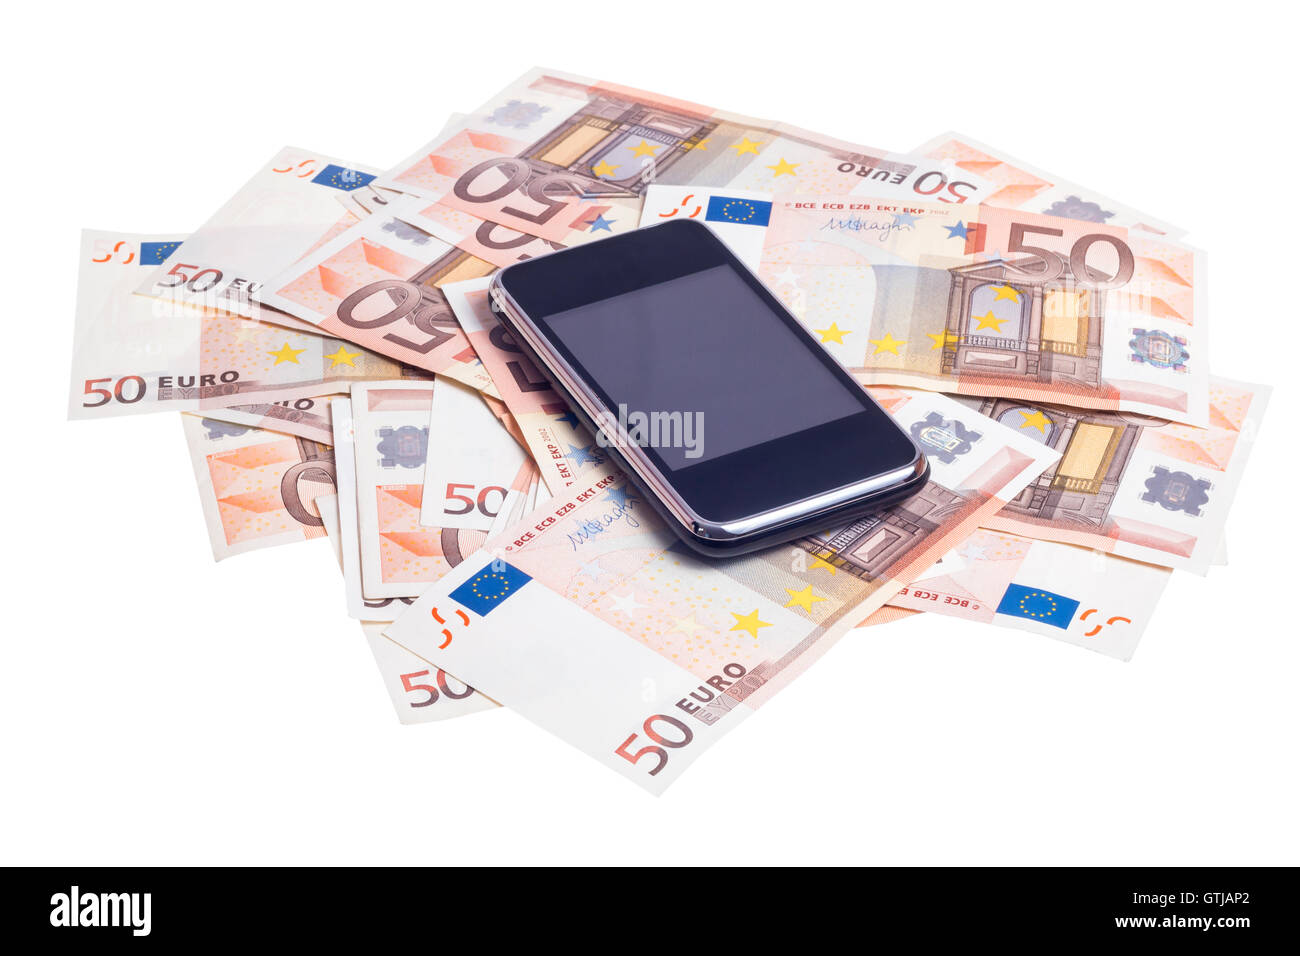 Mobile smart phone over fifty euro notes isolated on white background Stock Photo